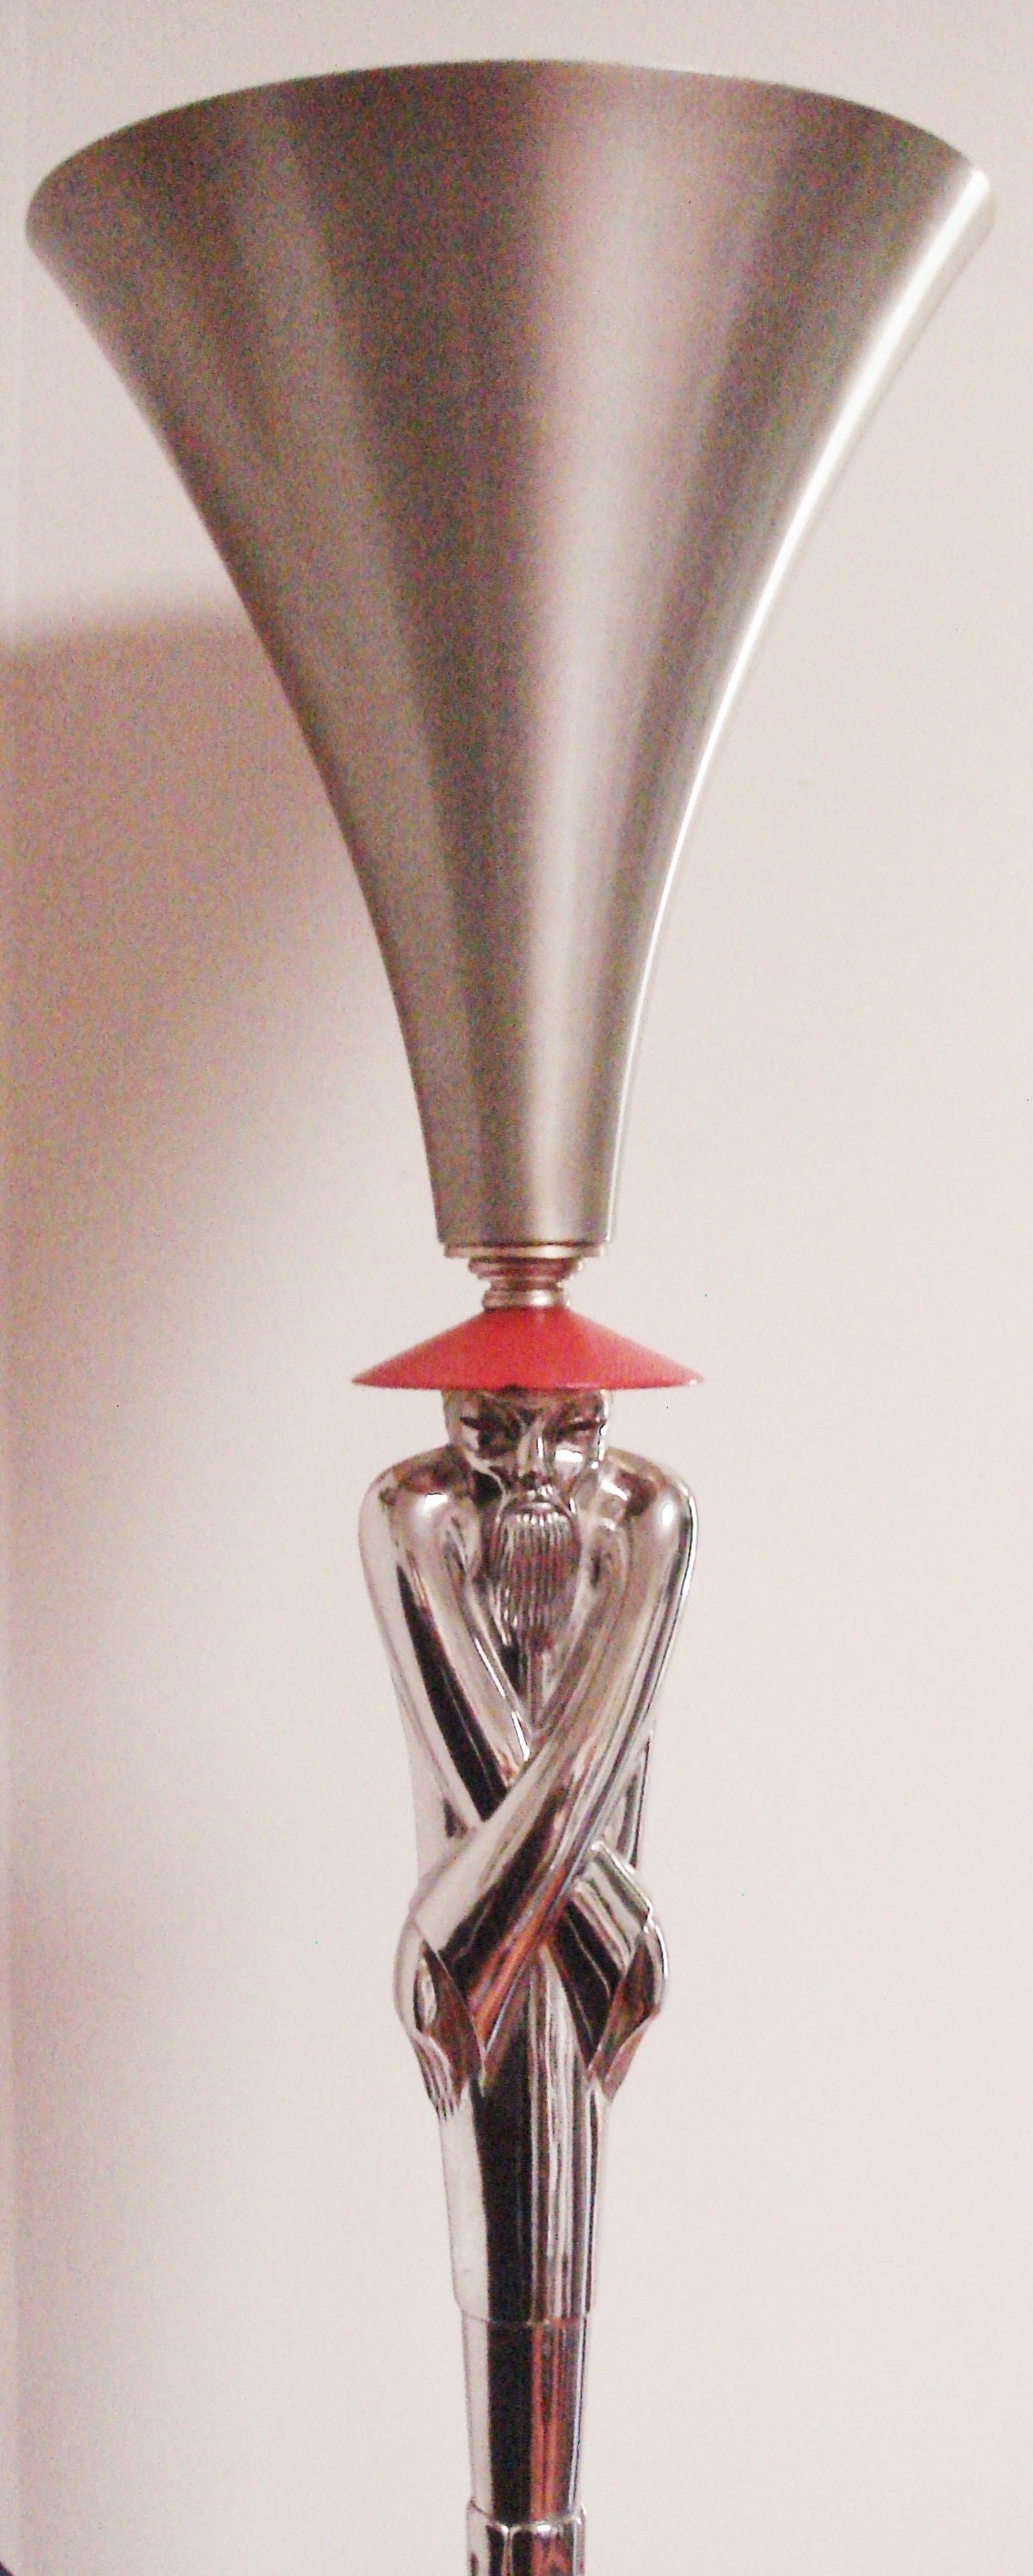 This rare American Mid-Century nickel plated torchiere was designed by 